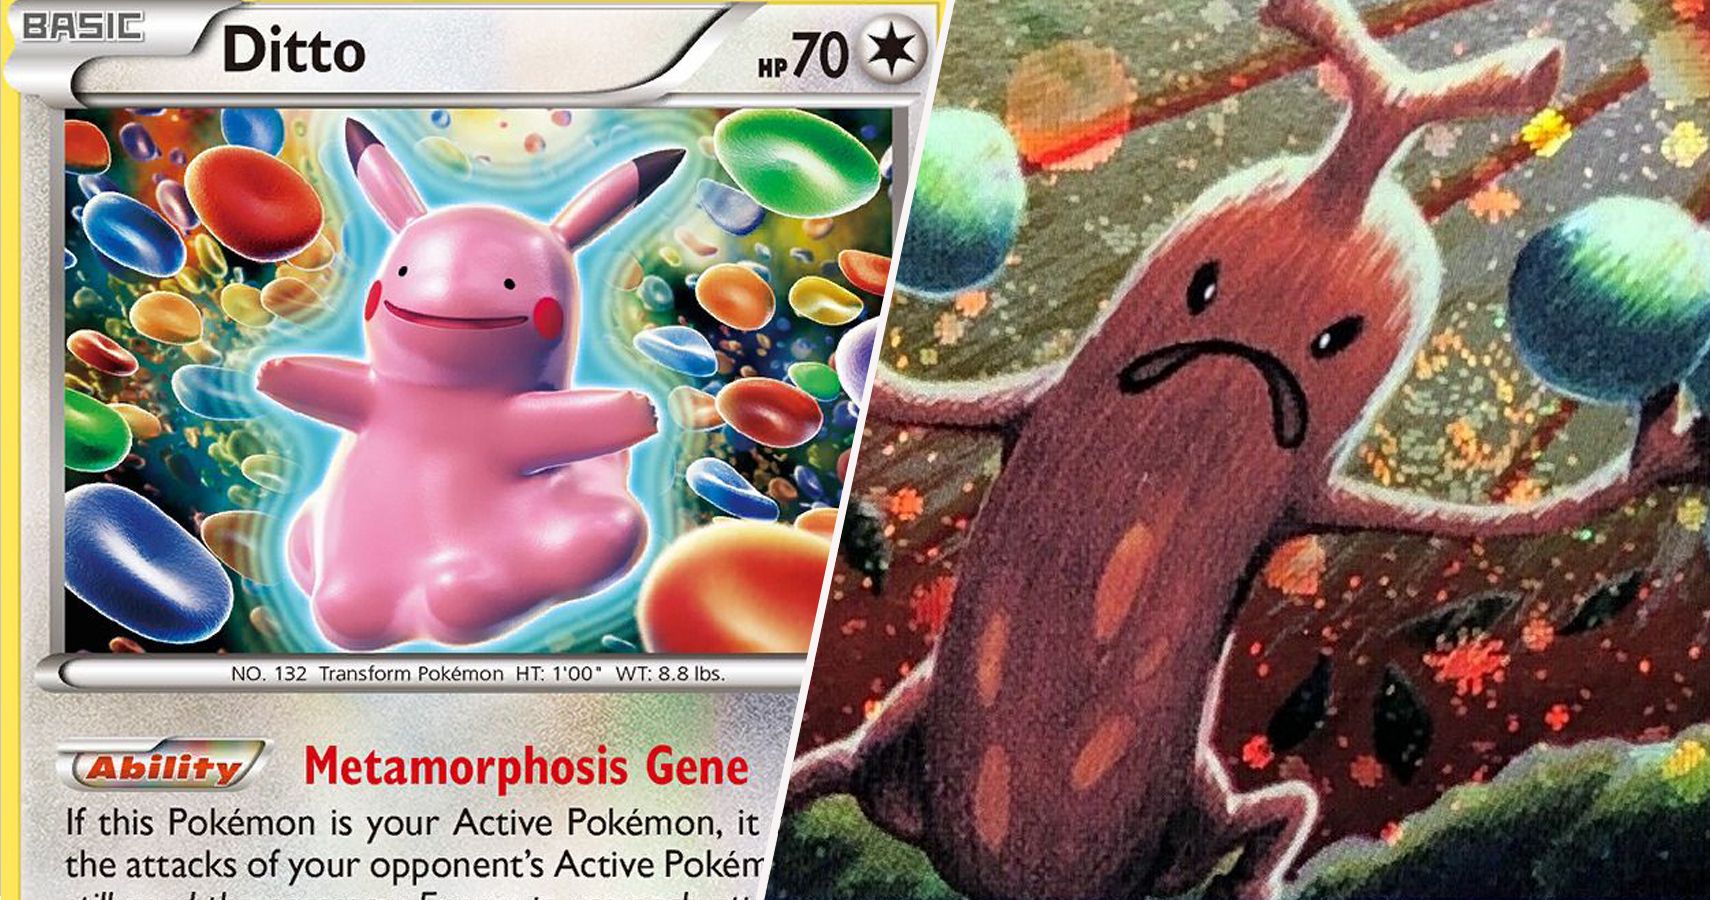 The 10 Weirdest Looking Pokemon Trading Cards, Ranked